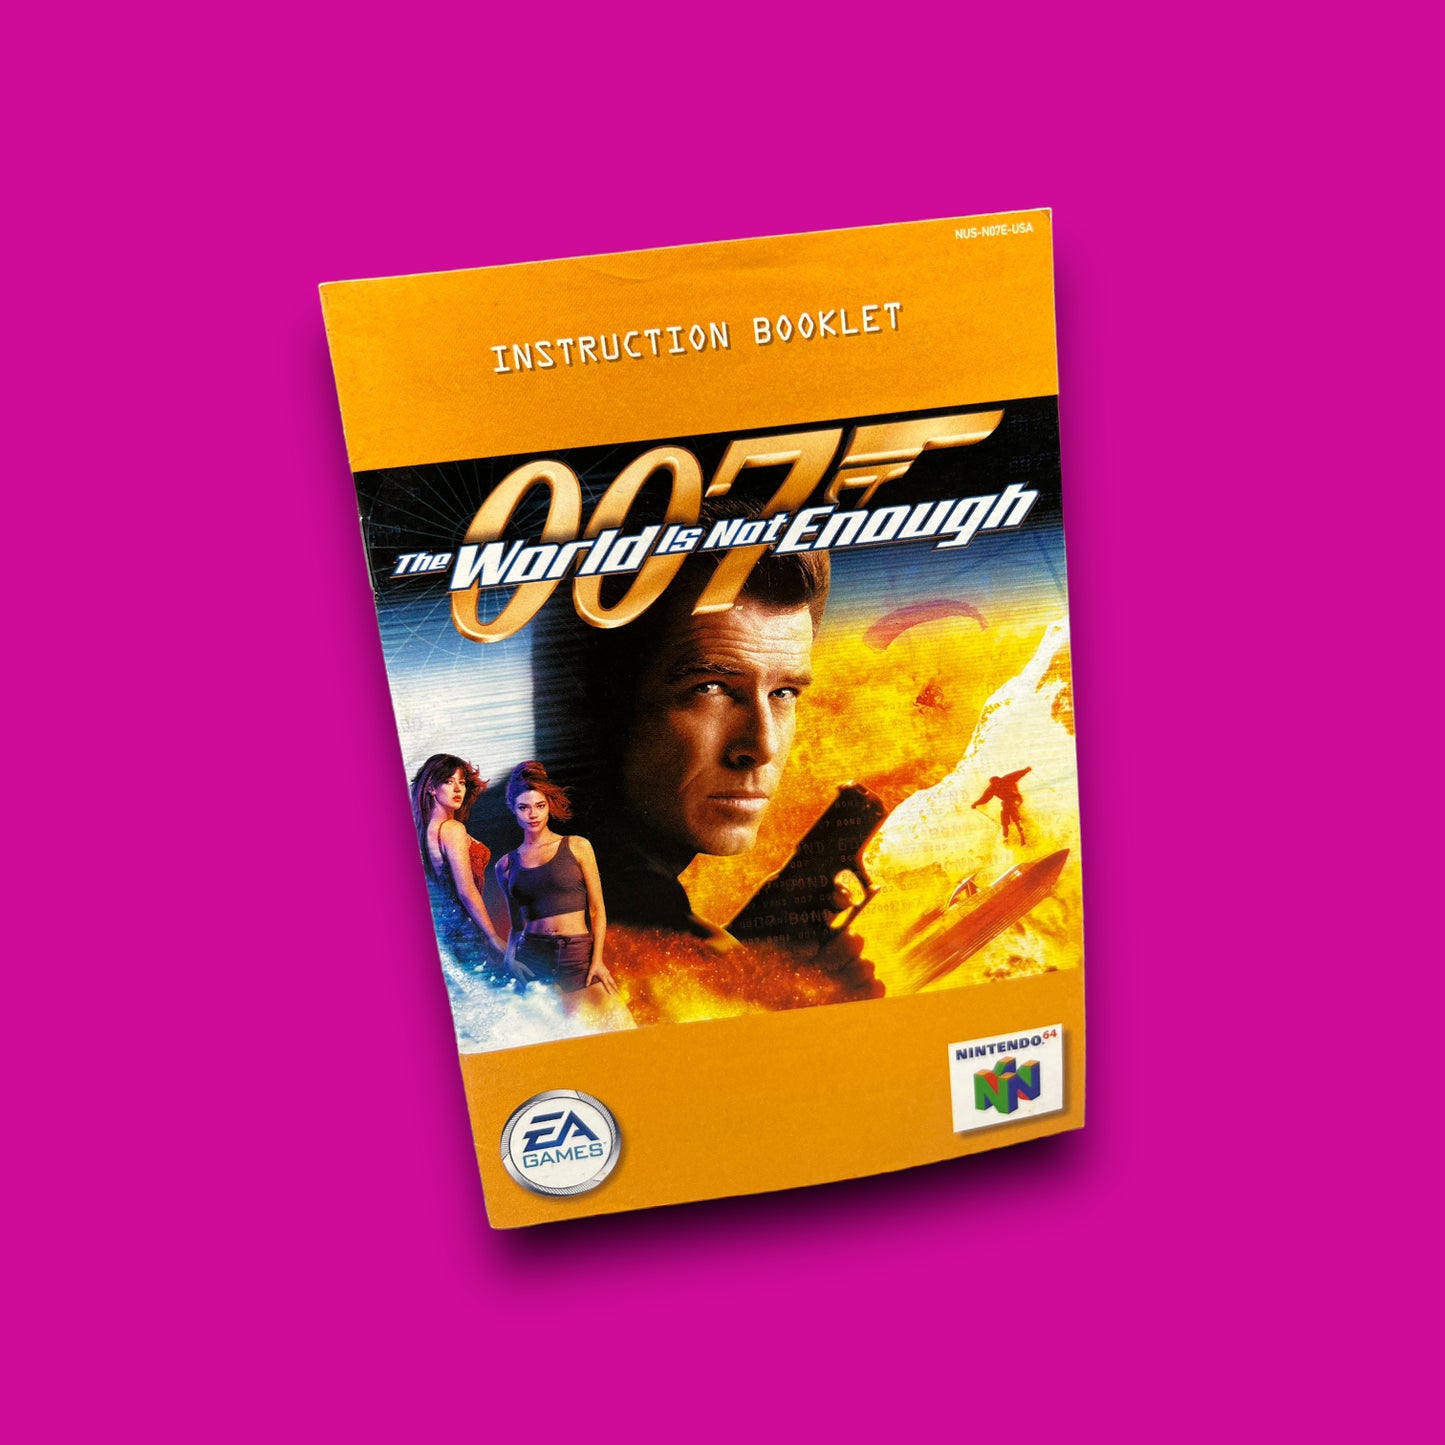 007: The World Is Not Enough Manual (Nintendo 64, 2000)